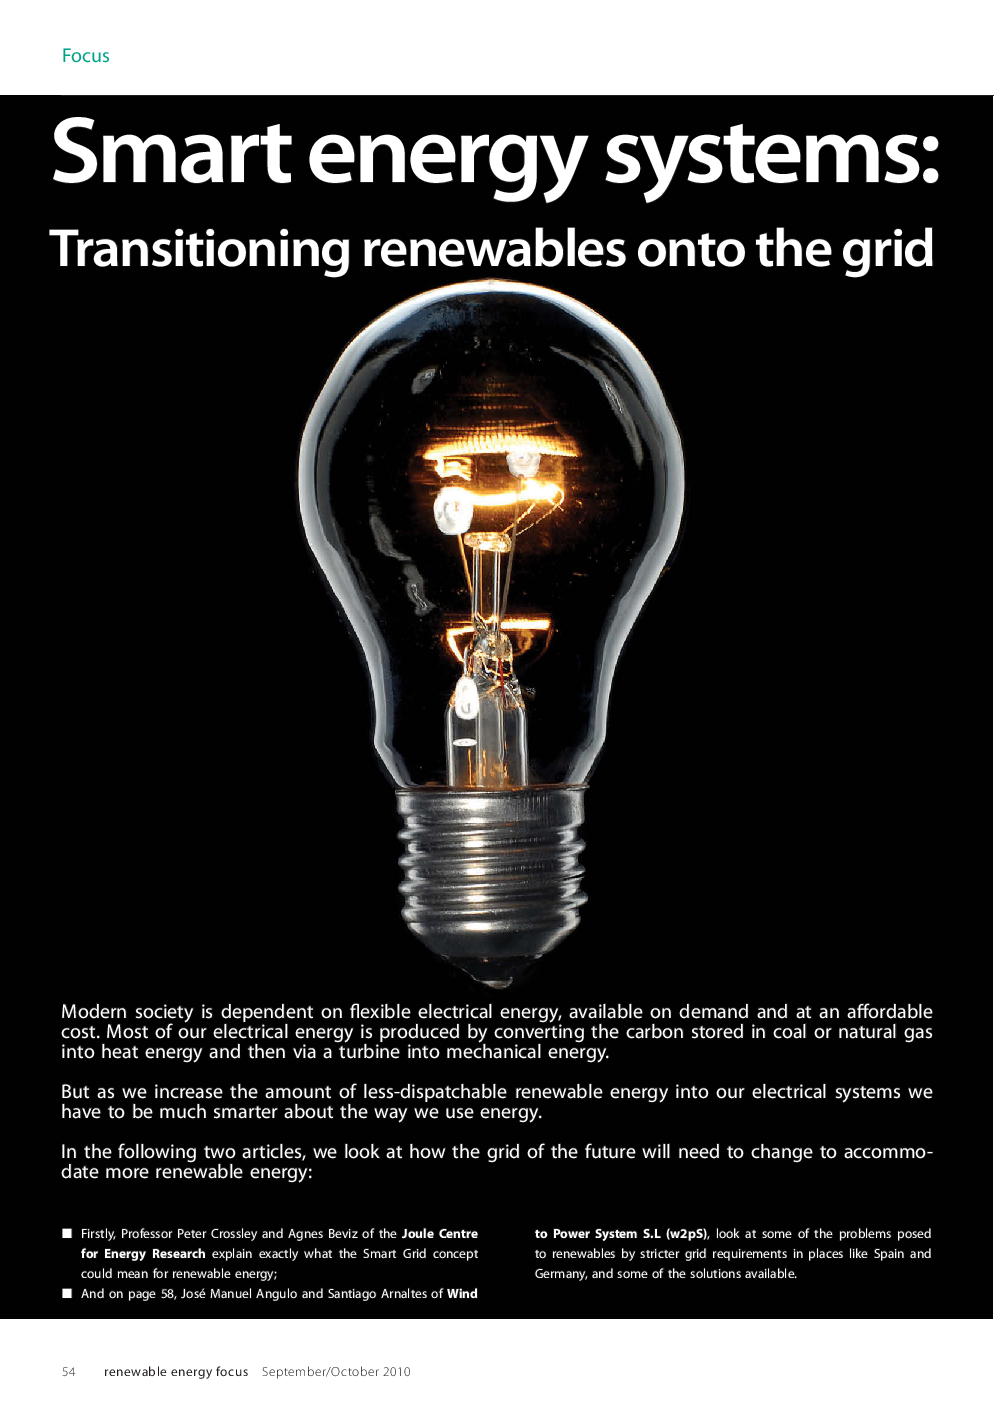 Smart energy systems: Transitioning renewables onto the grid